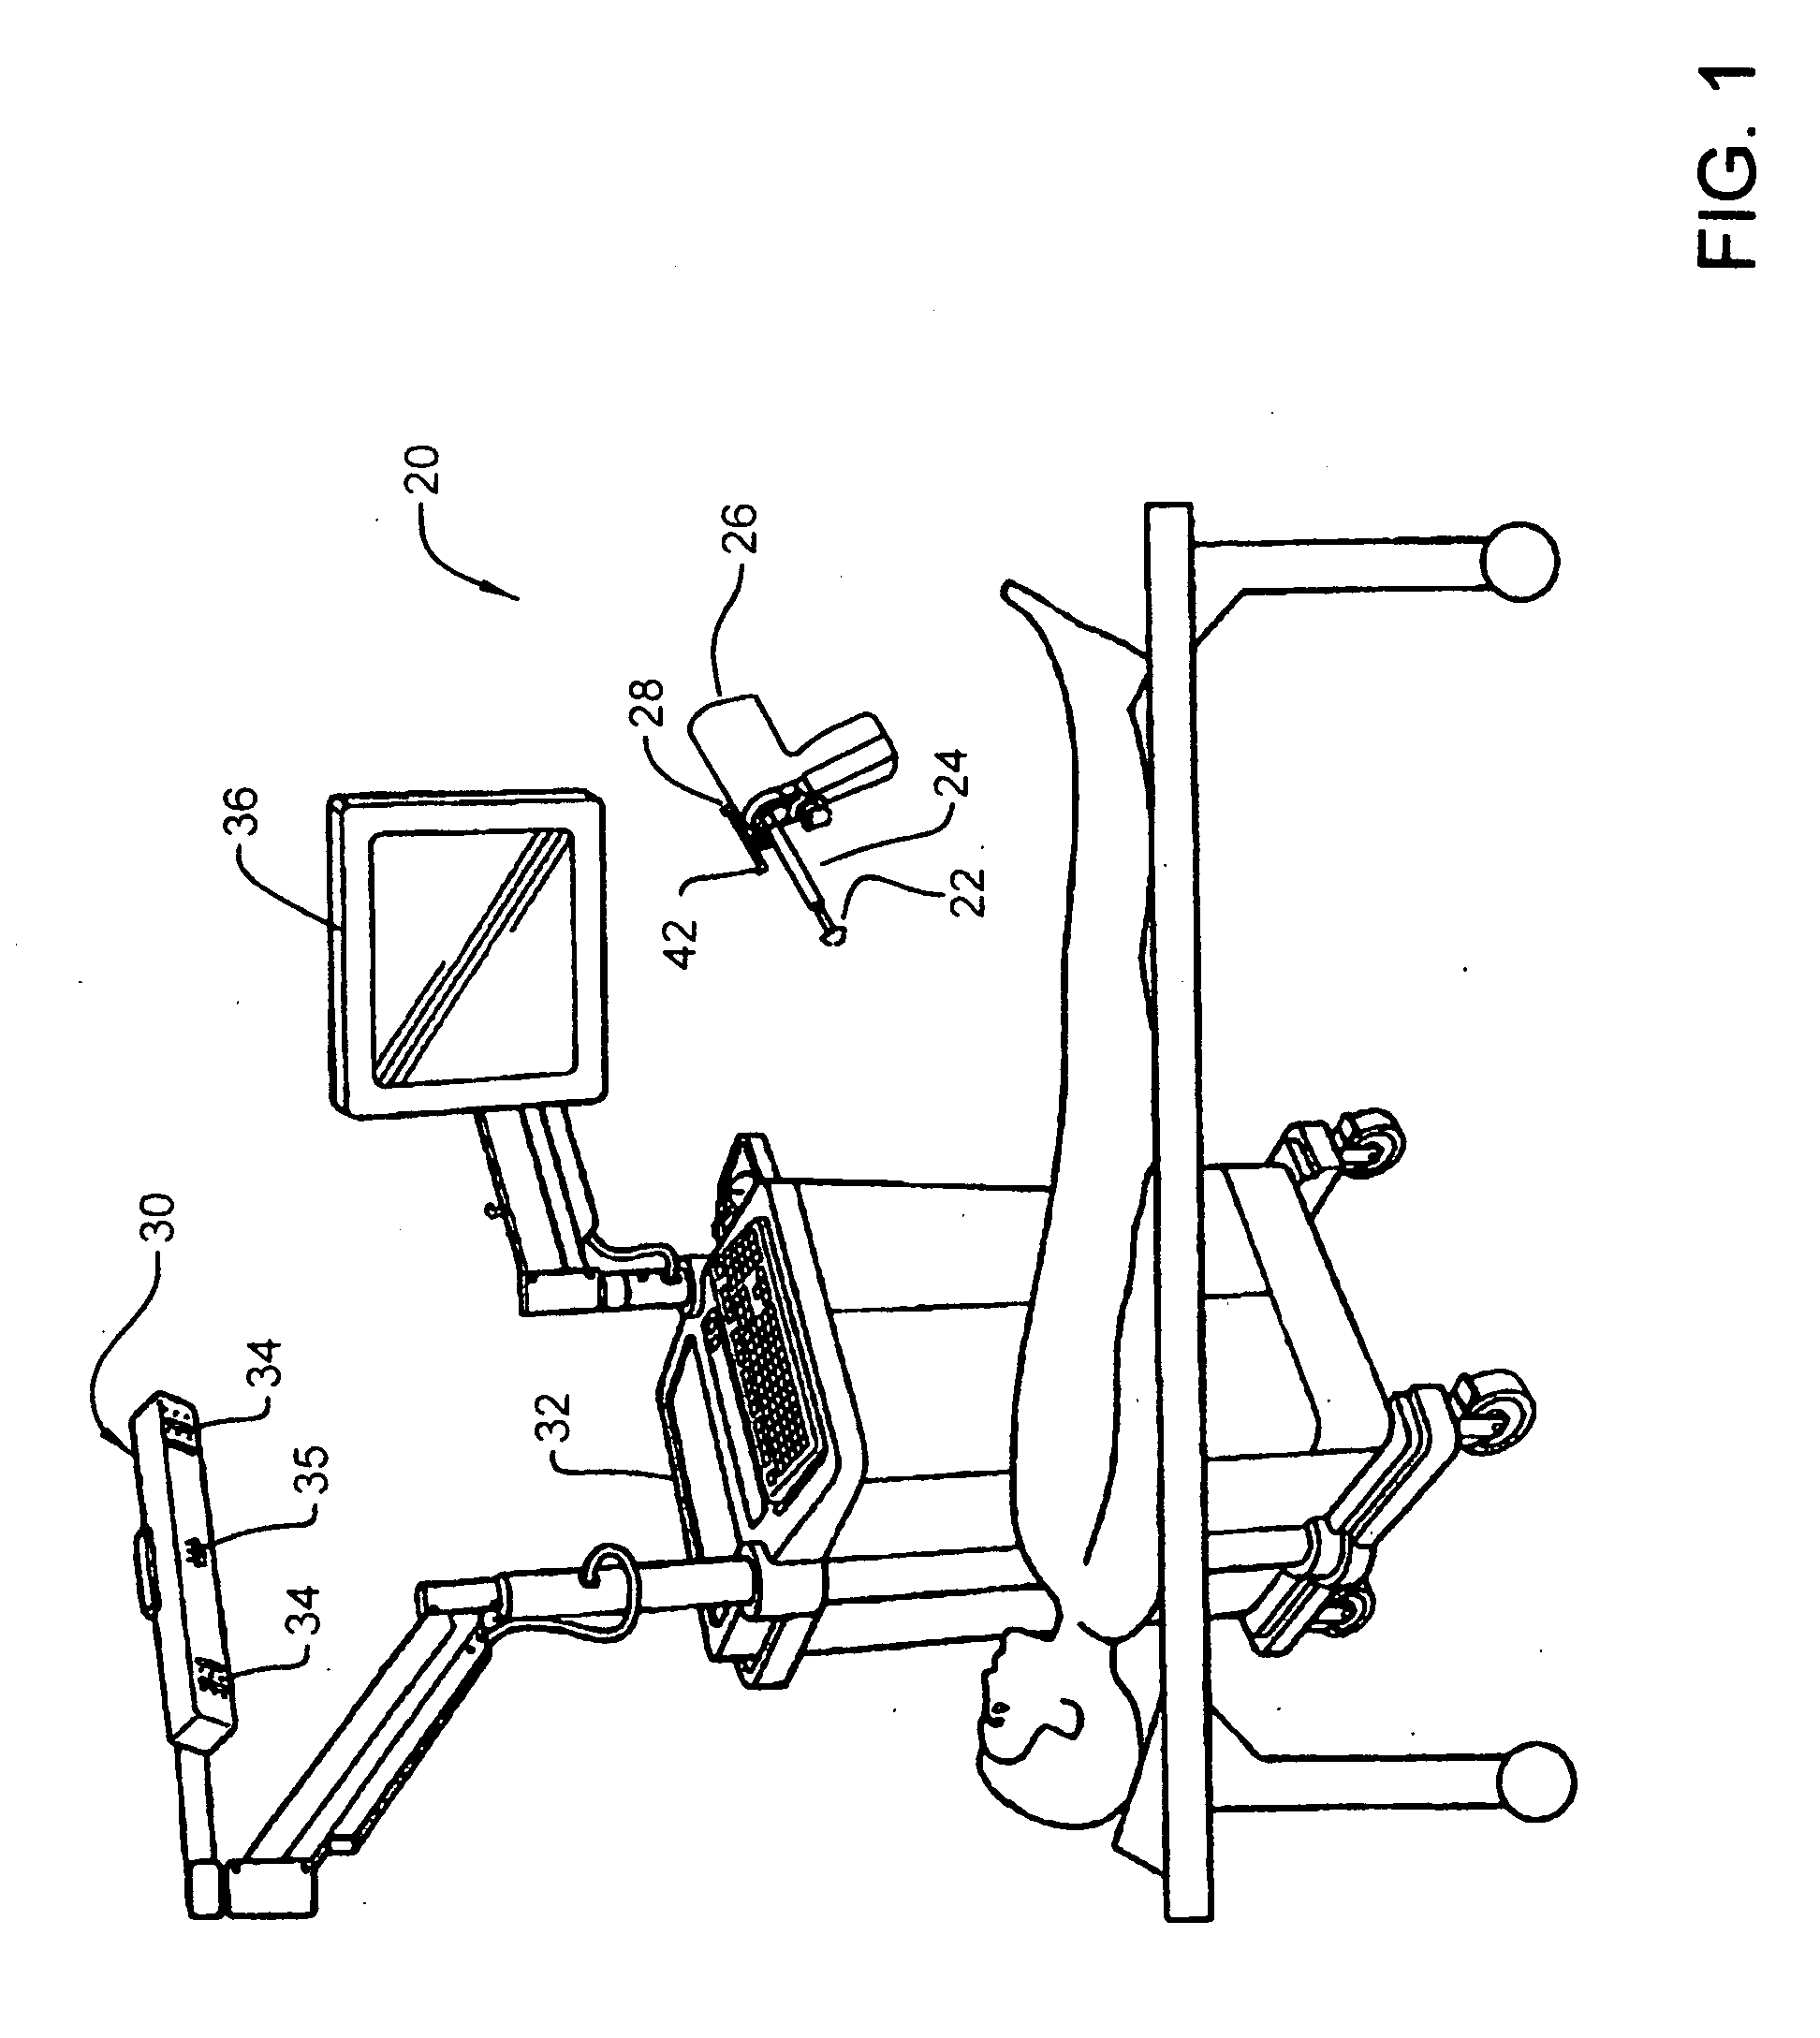 Wireless system for providing instrument and implant data to a surgical navigation unit